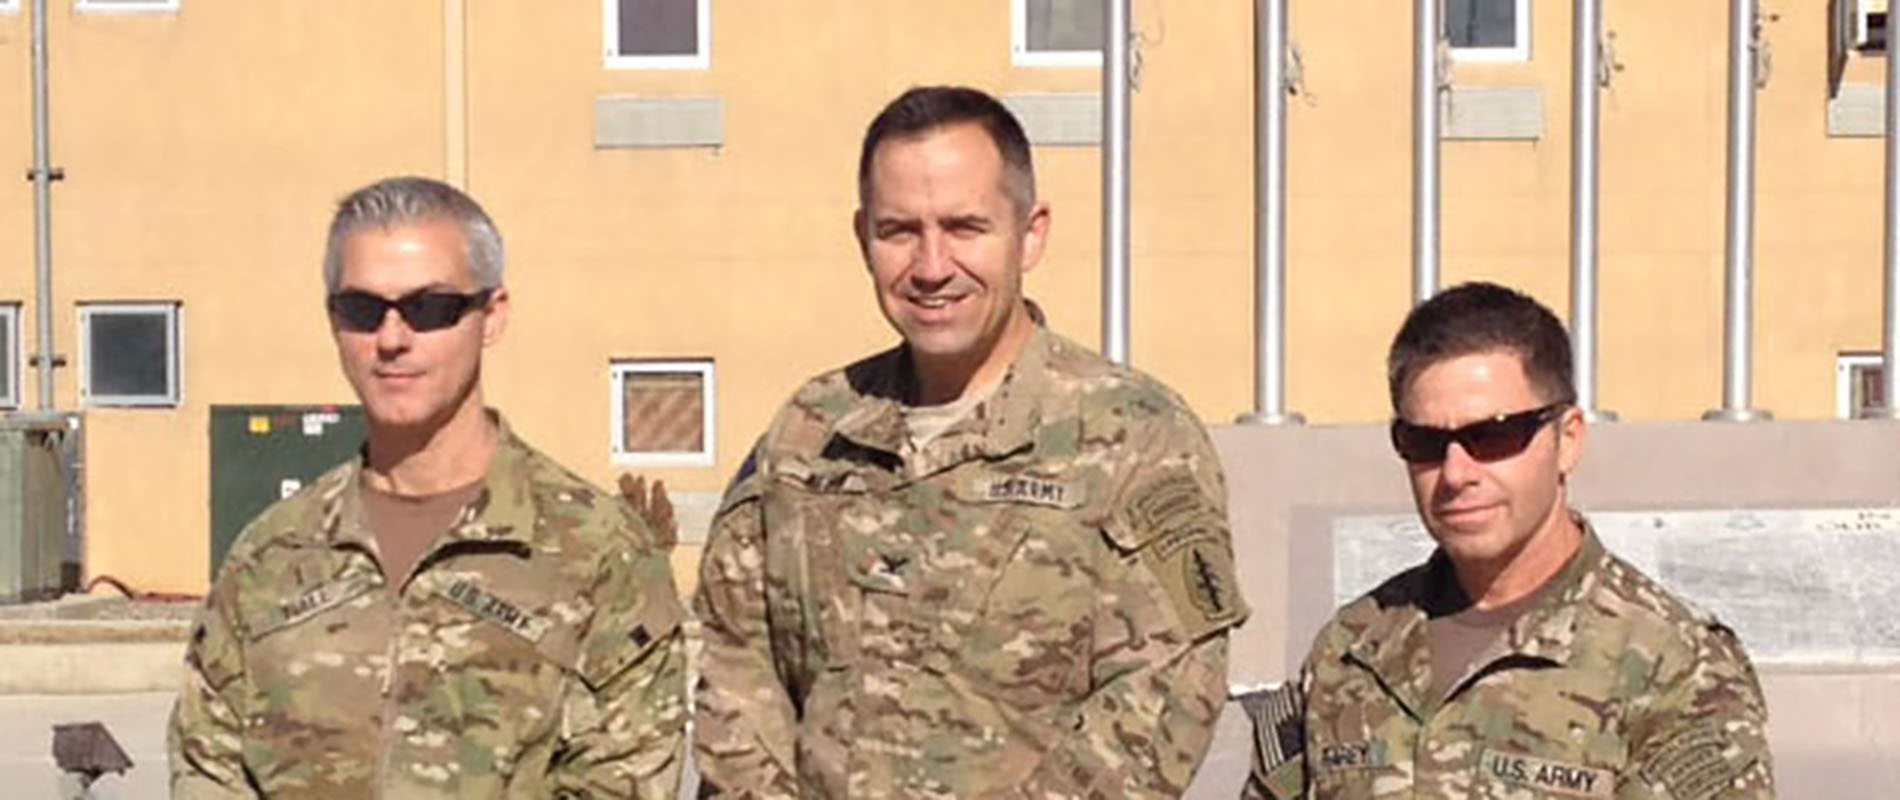 The last CJSOTF-A command group commemorates the unit deactivation on 31 October 2014 with a photo in front of the CJSOTF-A Memorial Wall, Camp Vance, Bagram Airbase. From left to right are: CW5 Edward K. Hall, COL Robert L. Wilson, and CSM Brian C. Rarey.